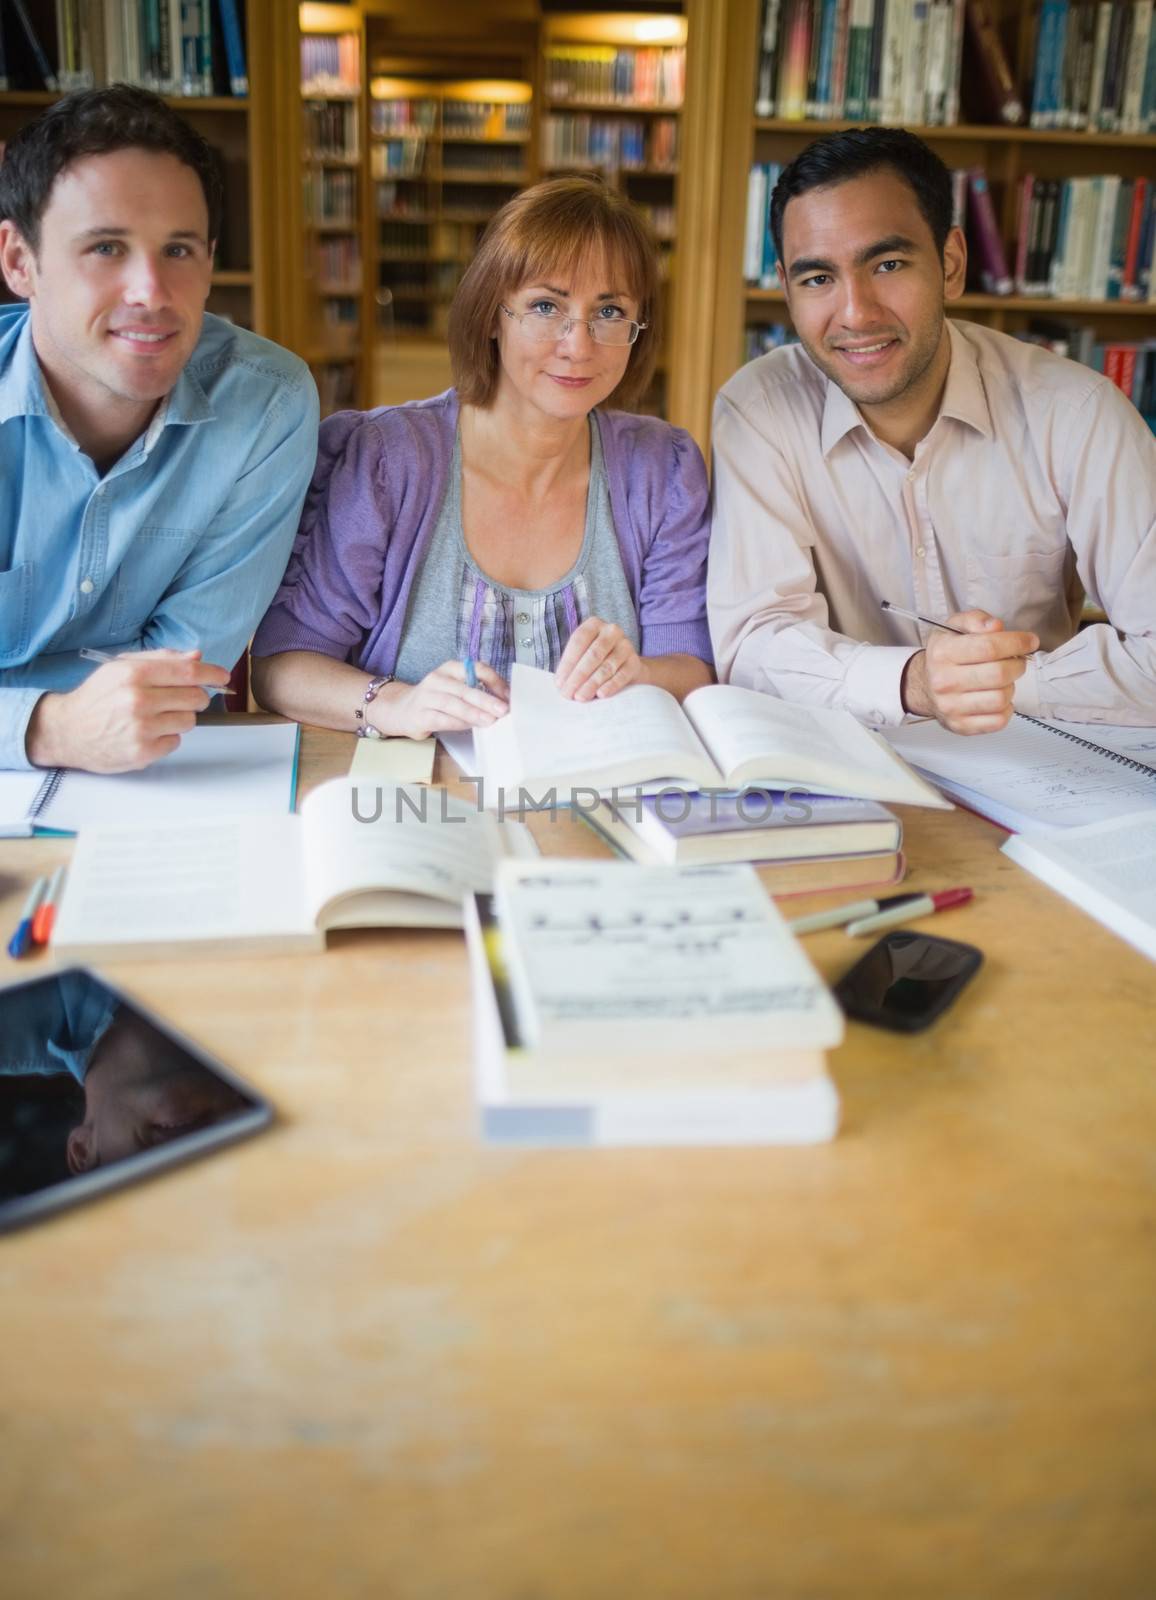 Portrait of three mature students studying together in the library